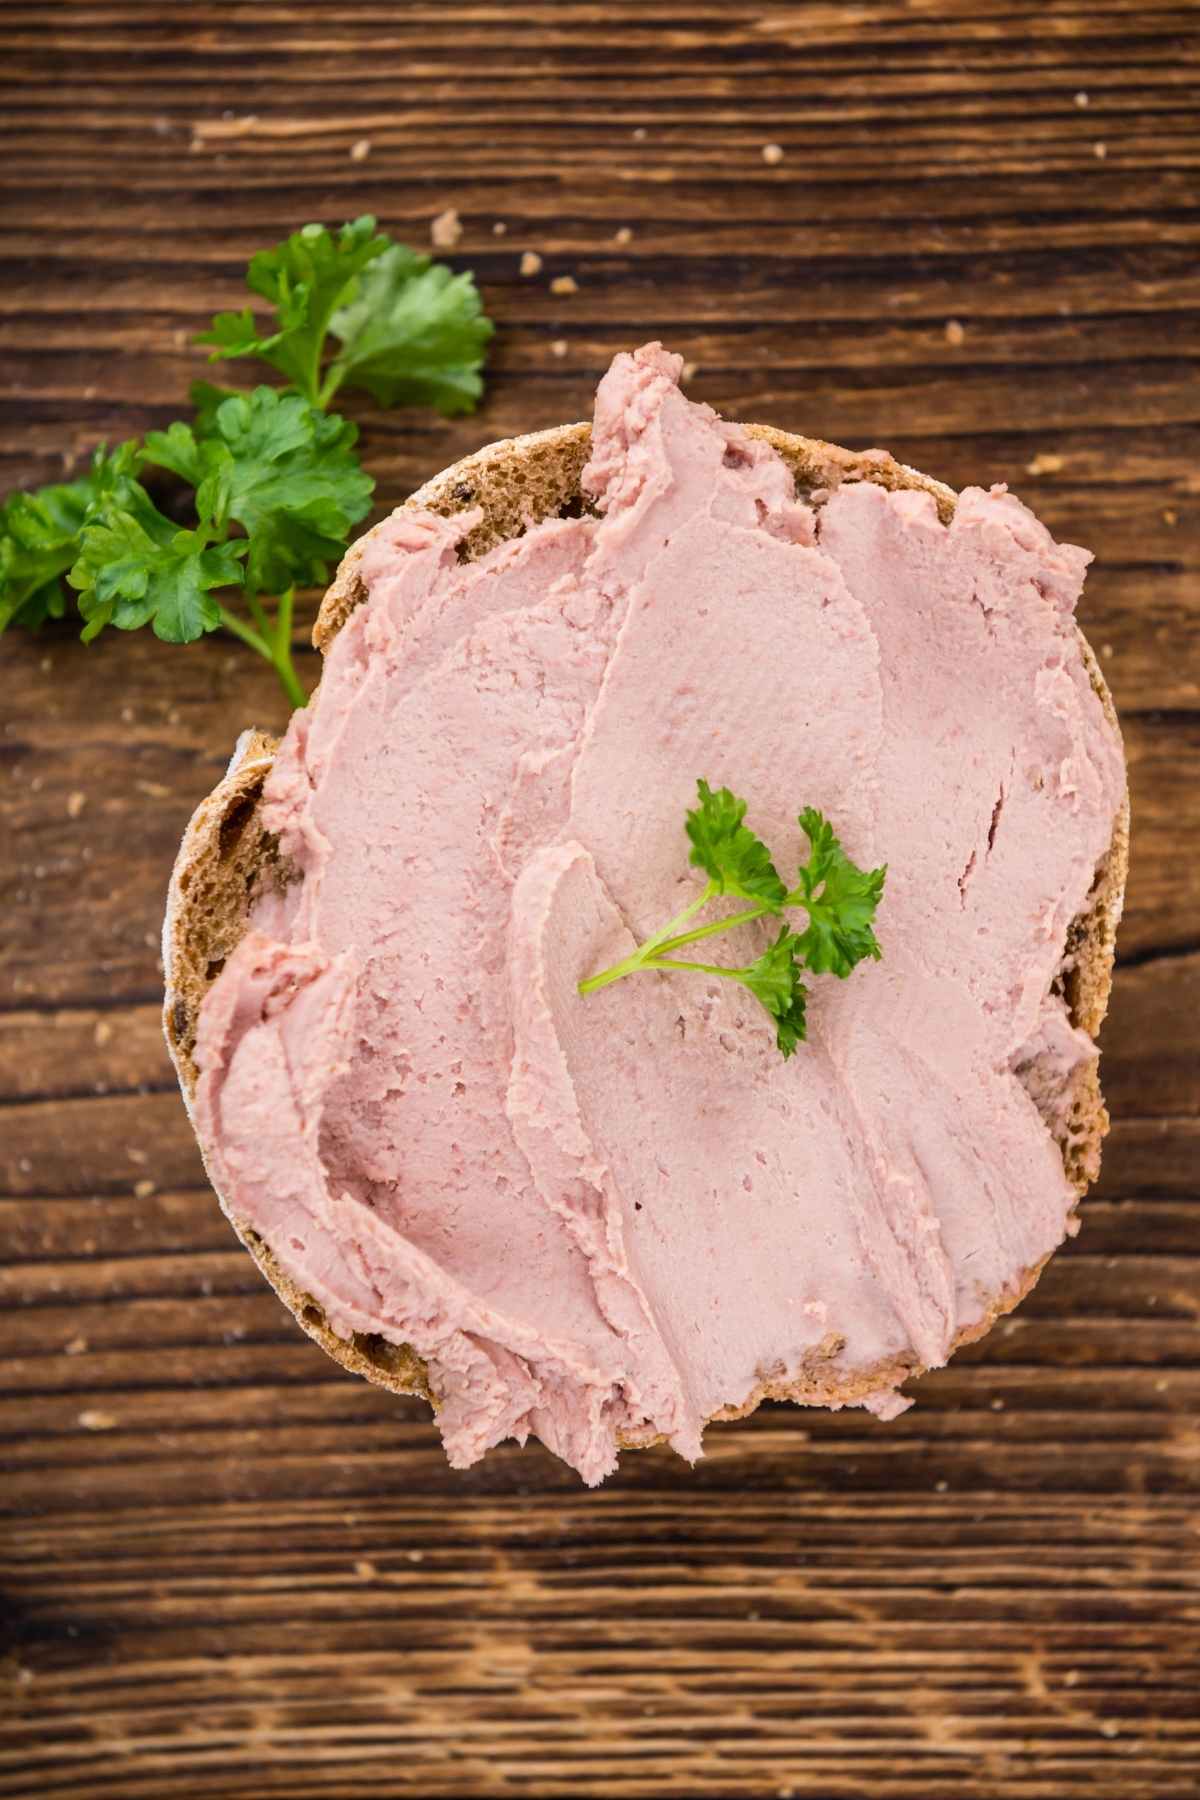 If you’ve shied away from liverwurst, you might be surprised to learn that it’s actually quite tasty! In this post we’re taking a closer look at this classic liverwurst sandwich and have also included a recipe so you can try it for yourself.